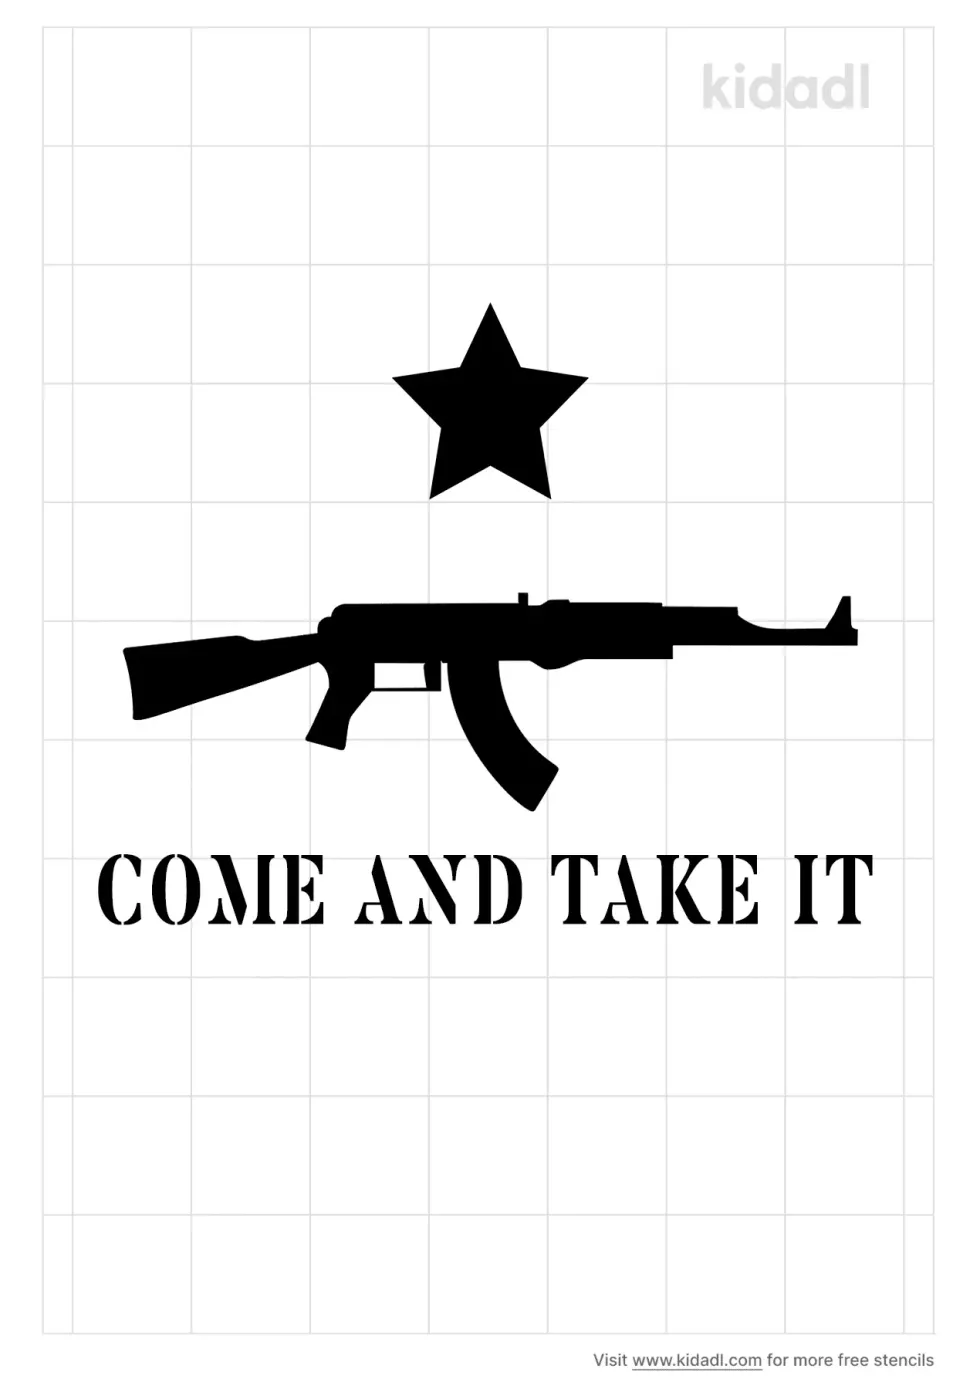 Come And Take It